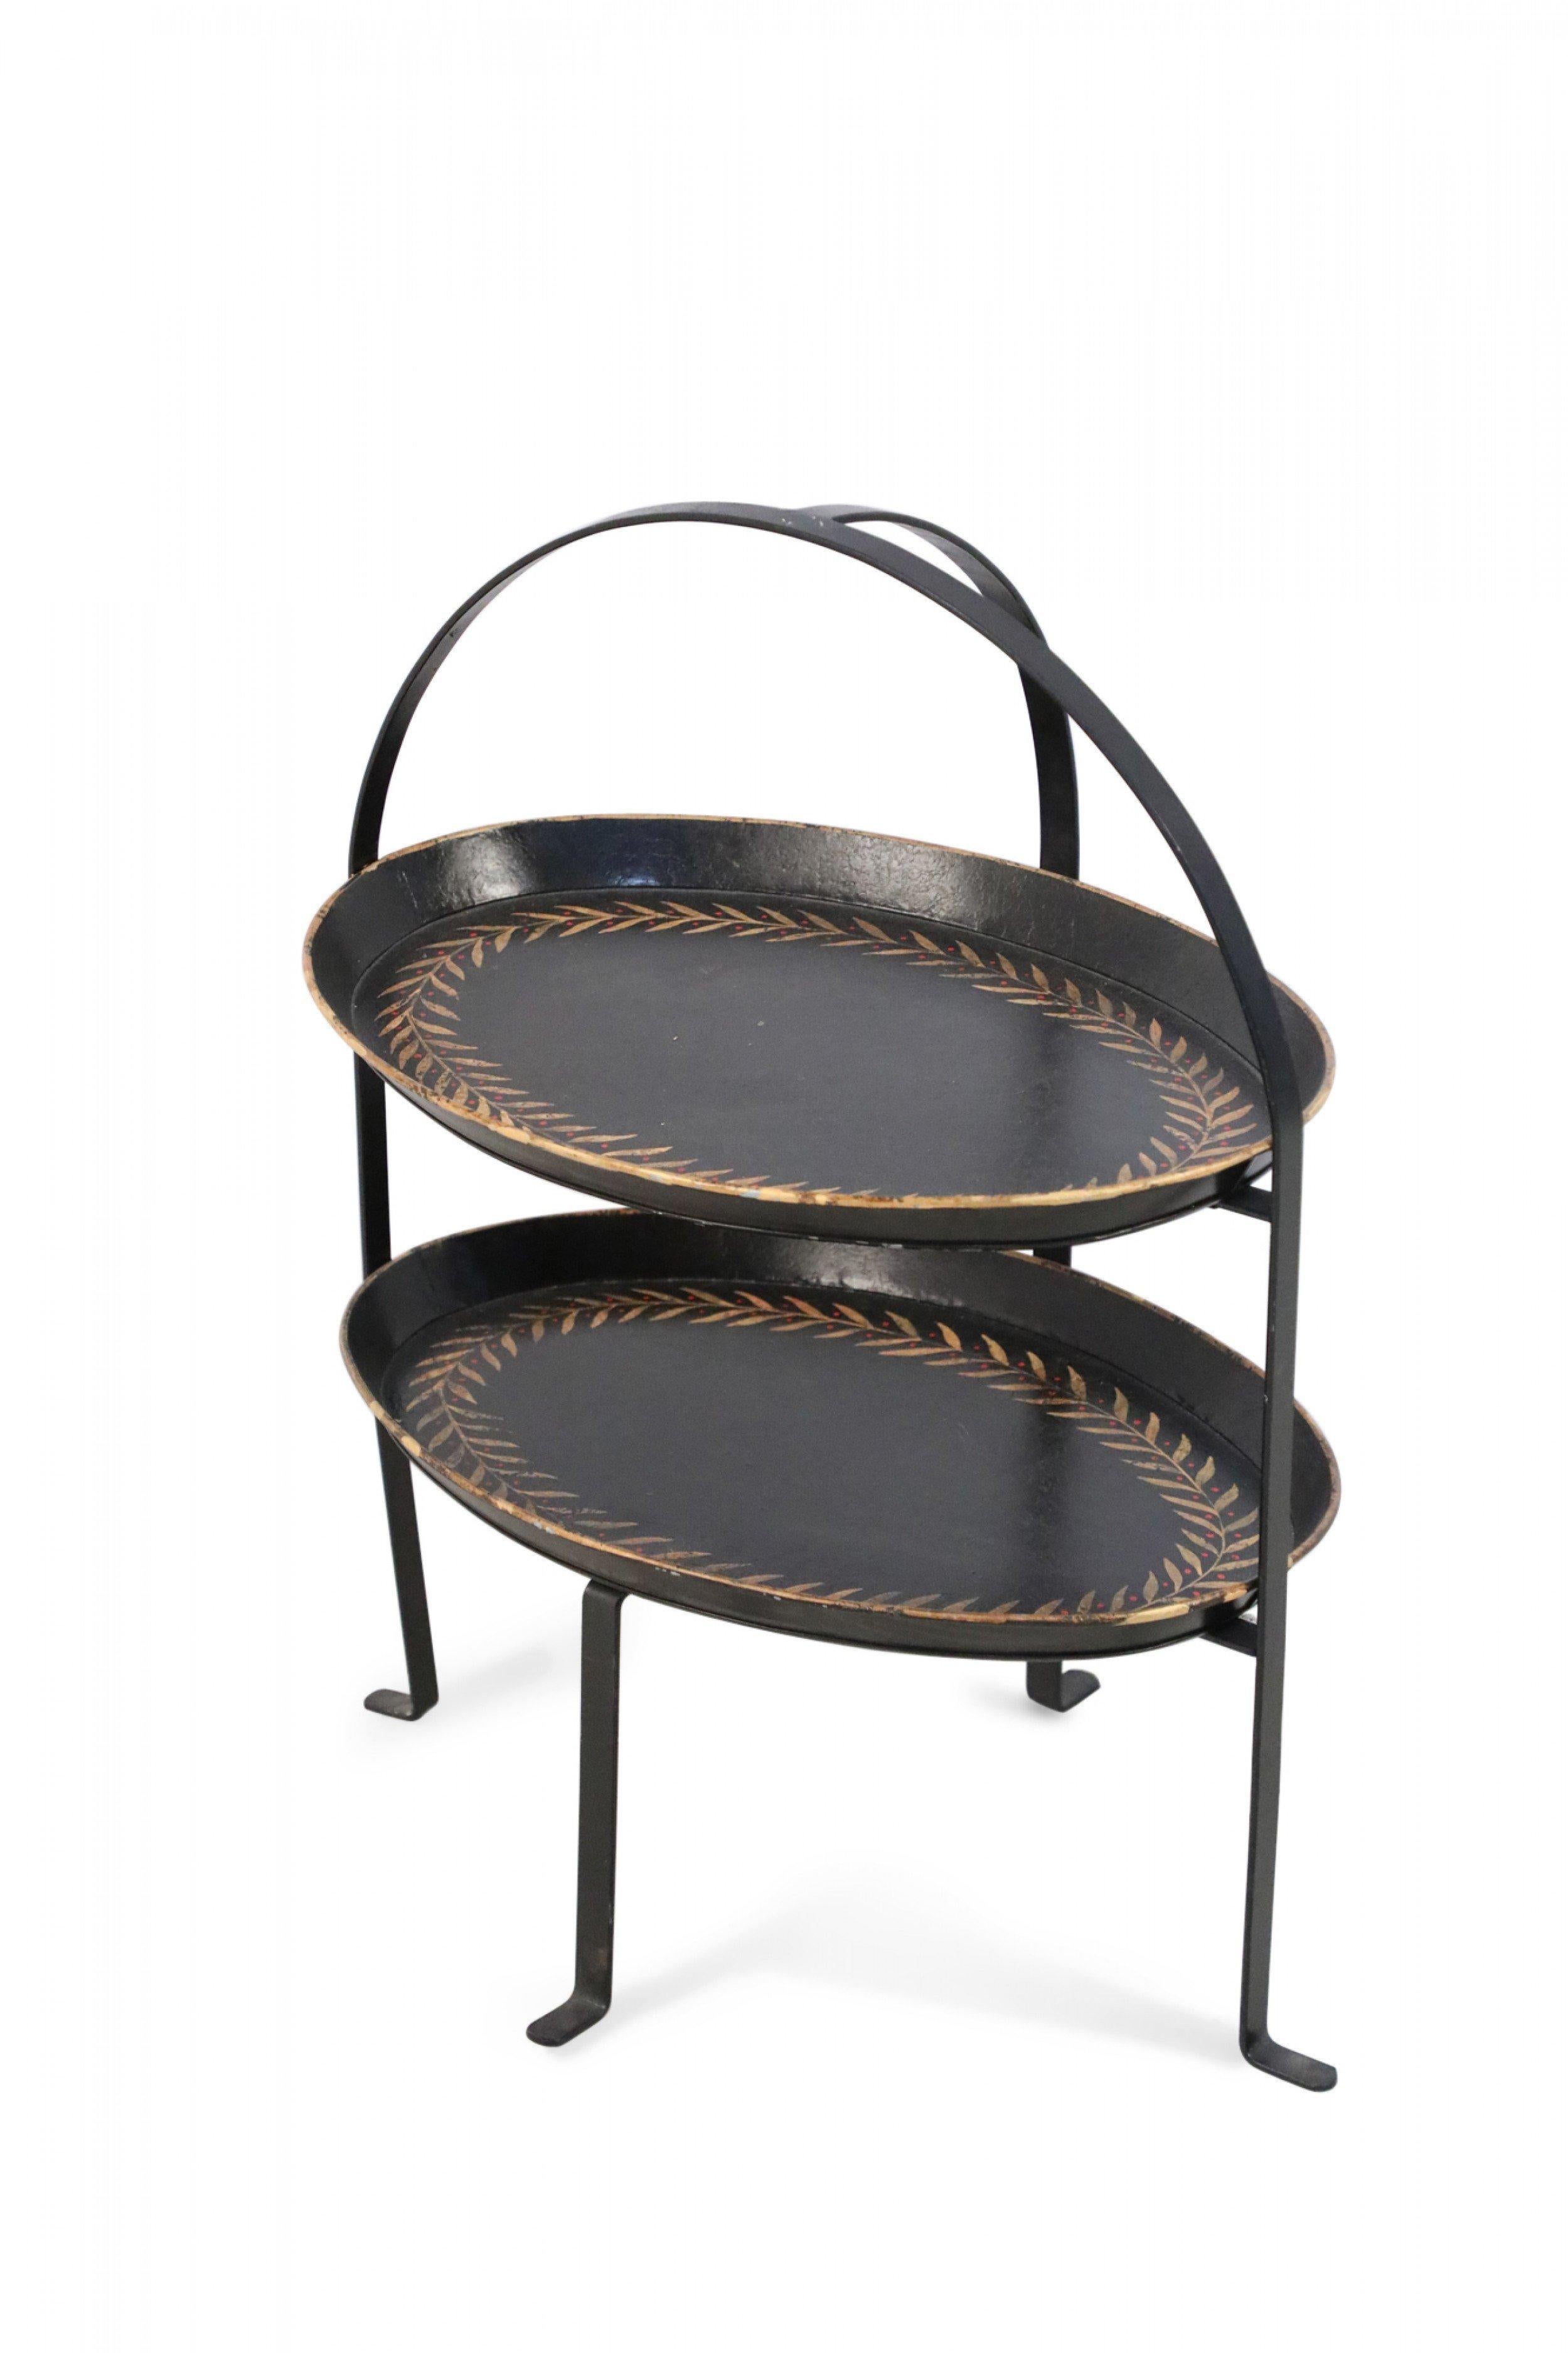 Vintage Chinese black tole, two-tiered server with a black metal frame holding two oval shelves decorated in a garland border of gold leaves with red dots (Available in green: NWL2450).